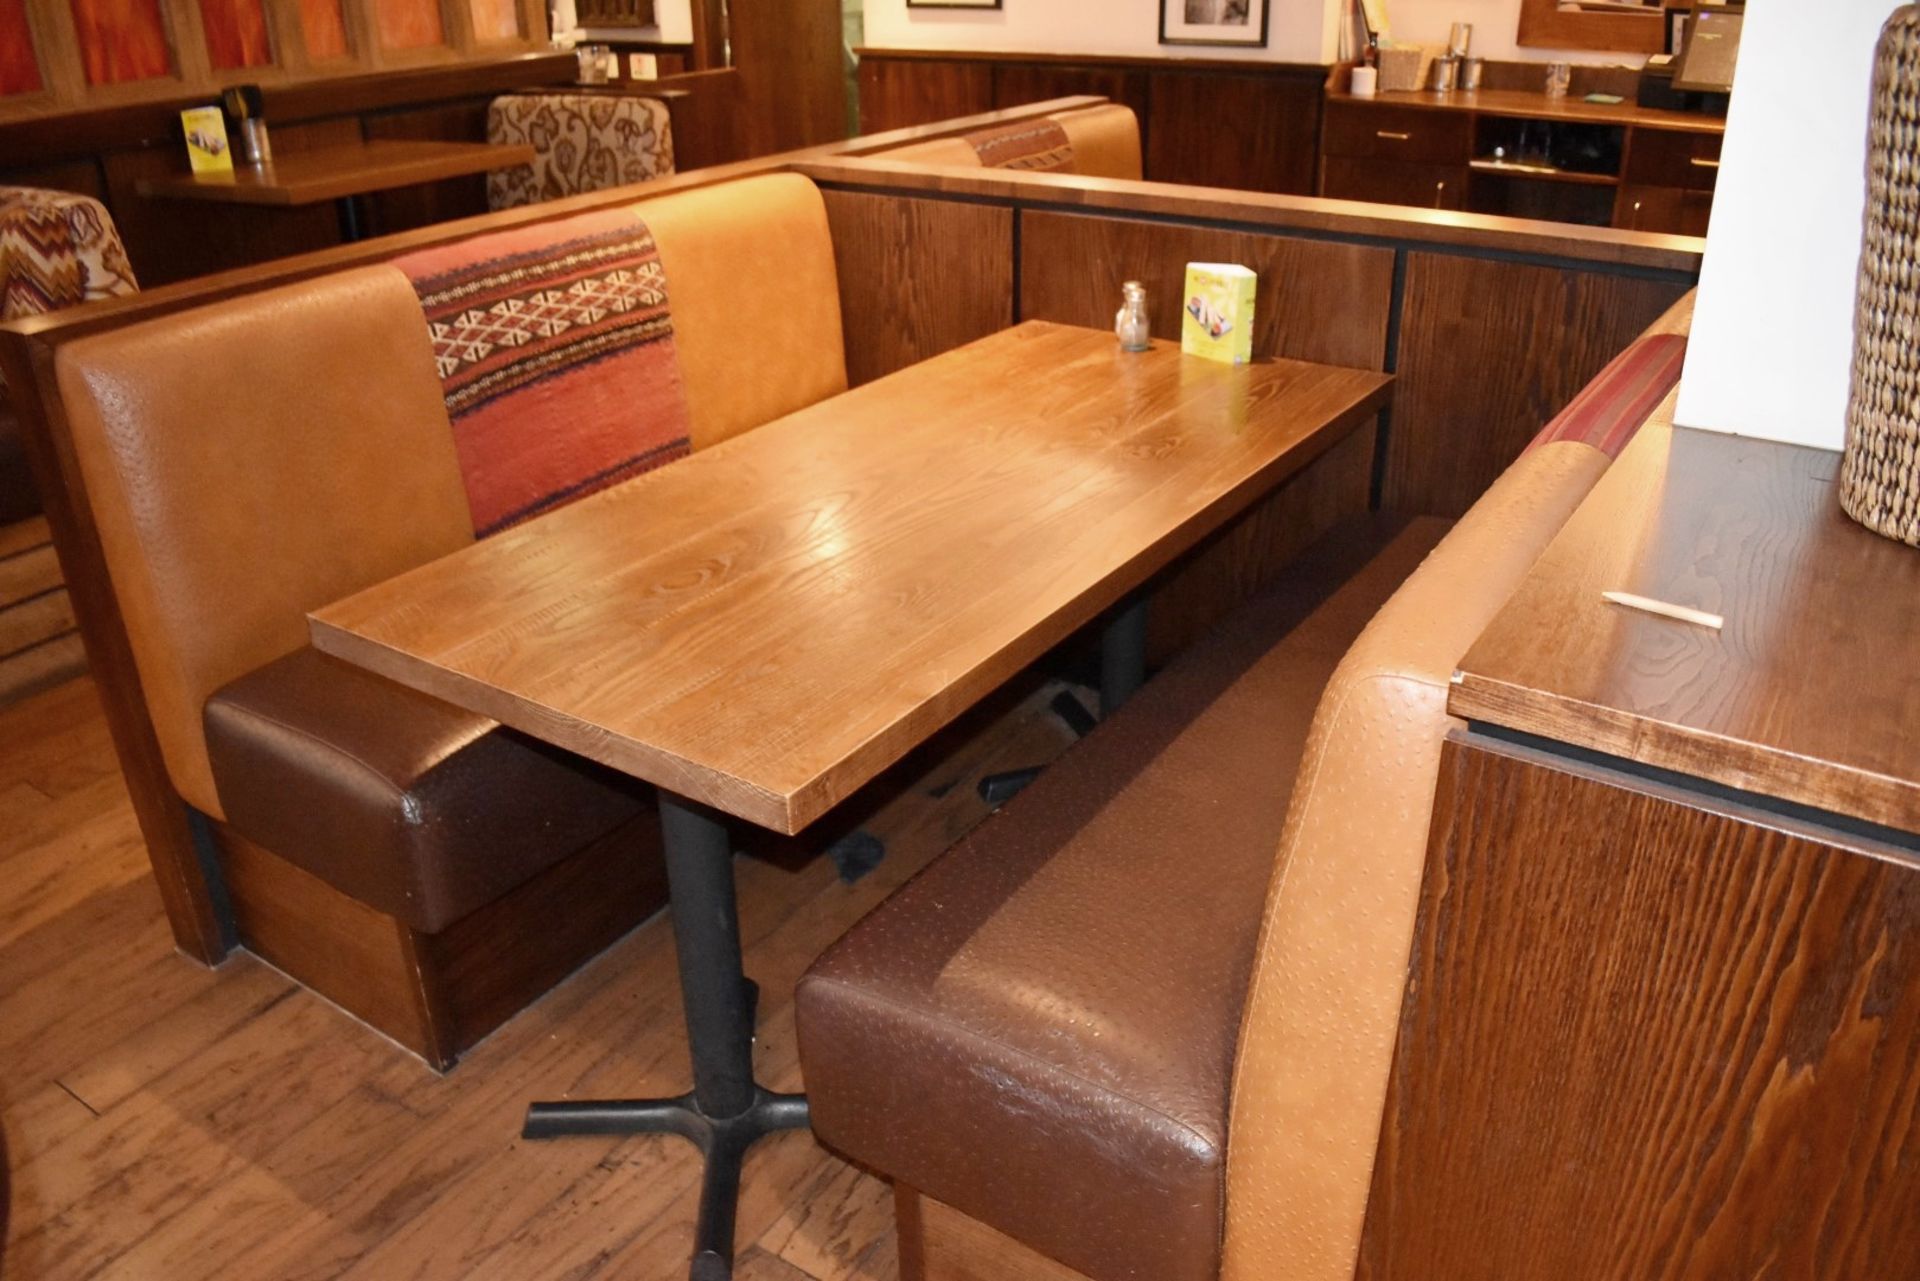 15-Pieces Of Restaurant Booth Seating Of Varying Length - Image 10 of 22